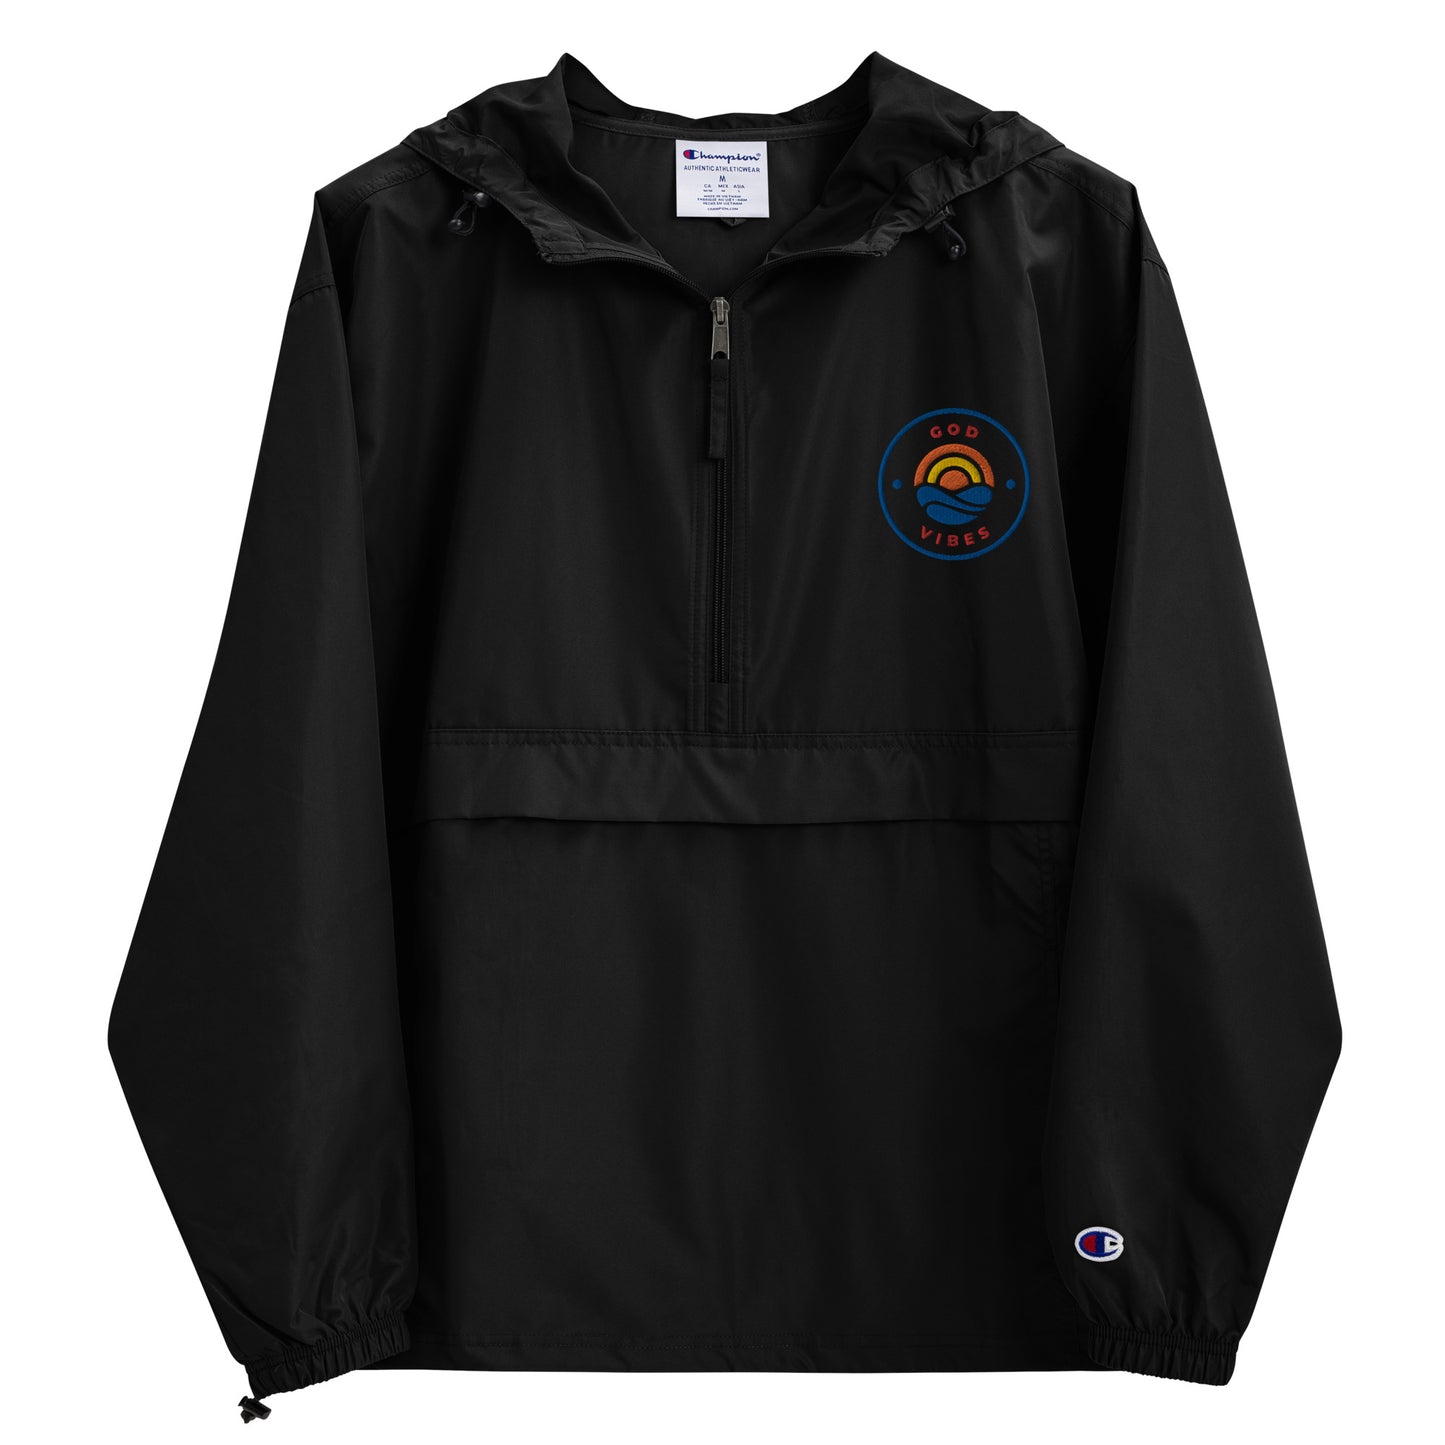 GOD VIBES Embroidered Champion Packable Jacket